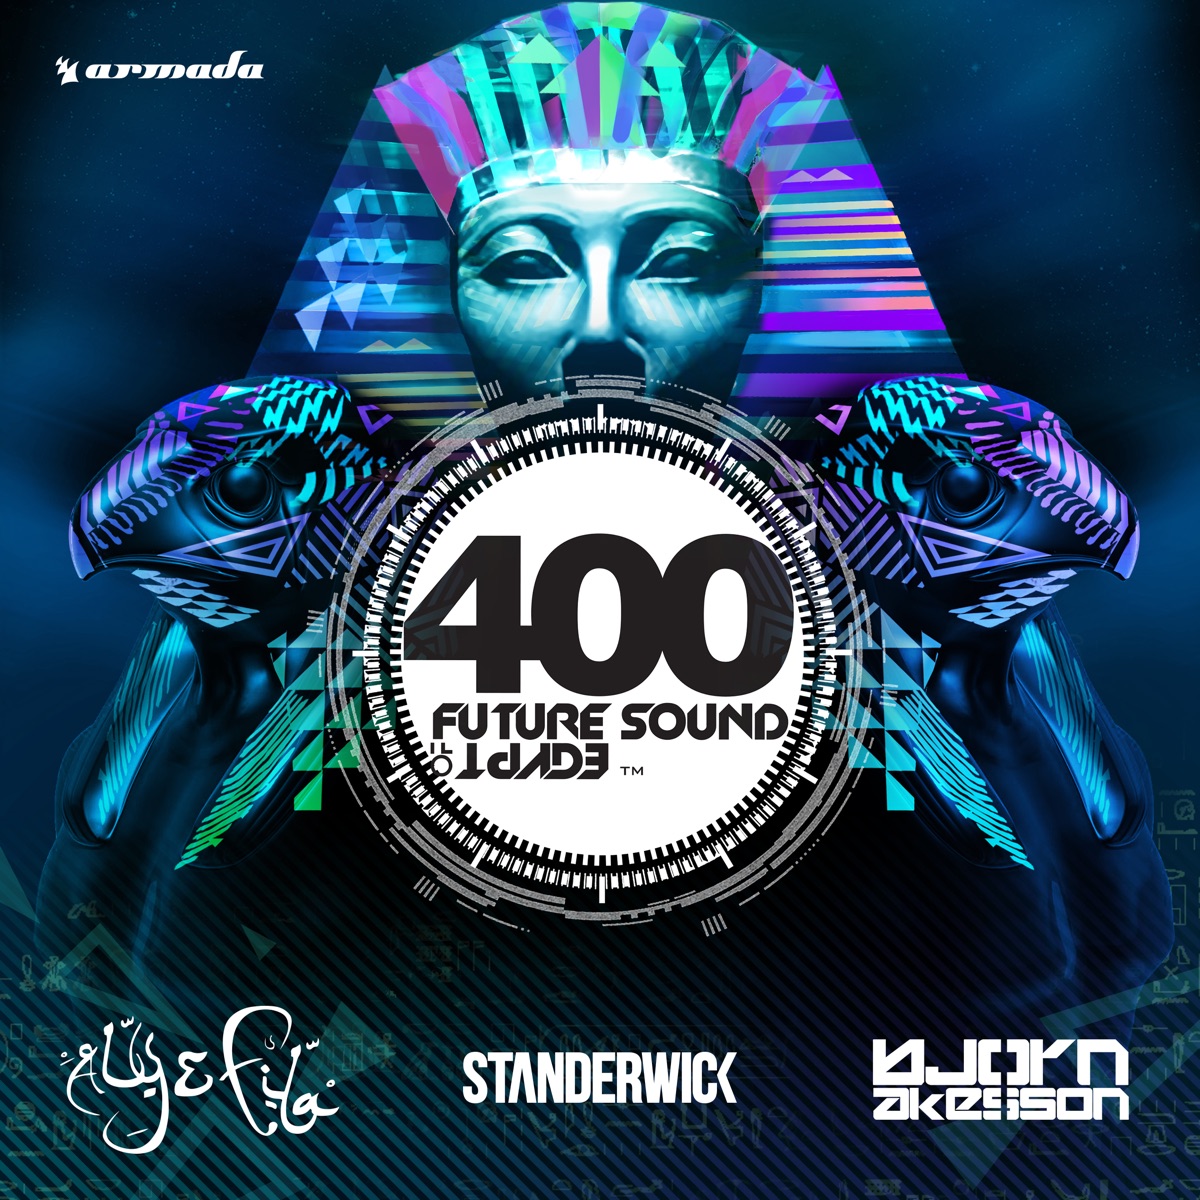 Future Sound of Egypt 400 (Mixed by Aly & Fila, Standerwick & Bjorn  Akesson) - Album by Aly & Fila, STANDERWICK & Bjorn Akesson - Apple Music